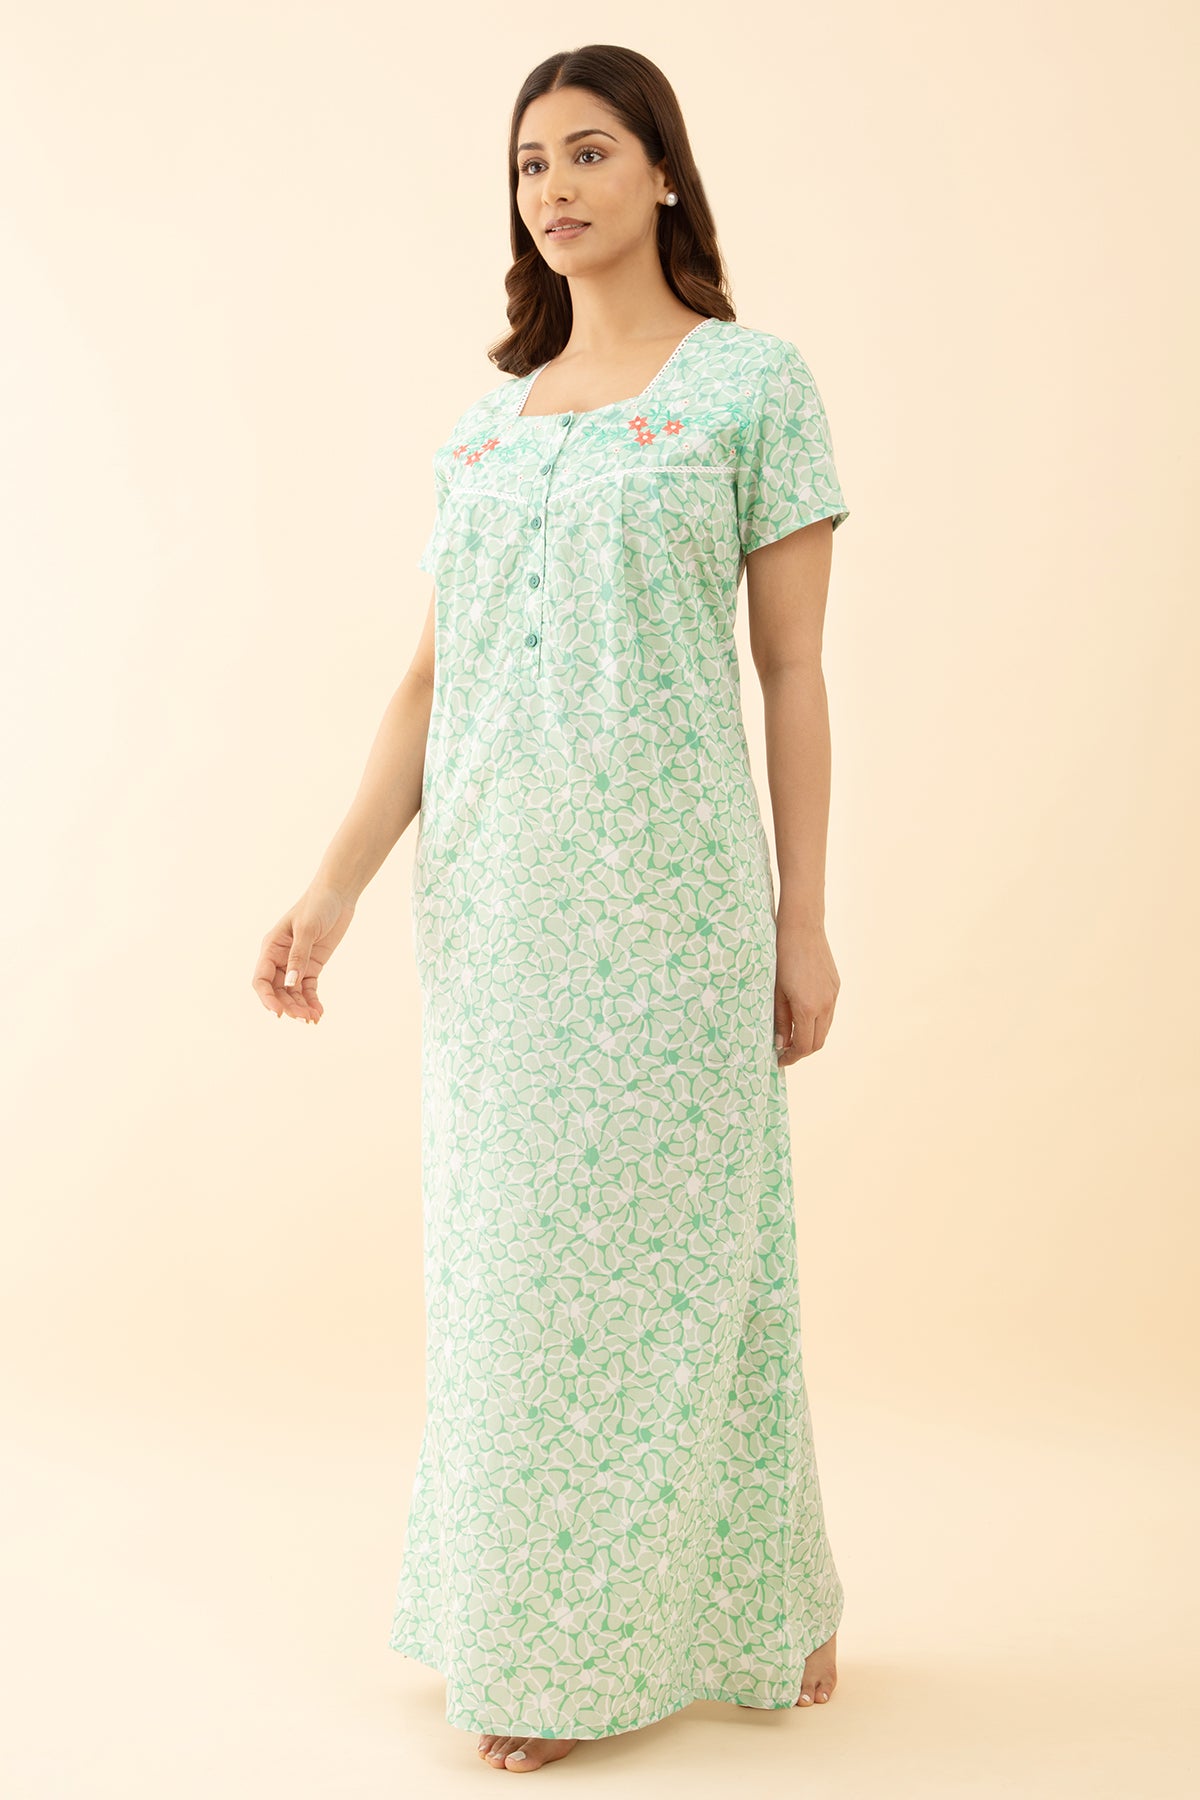 Green color Floral Embroidered Nighty with Square Neck